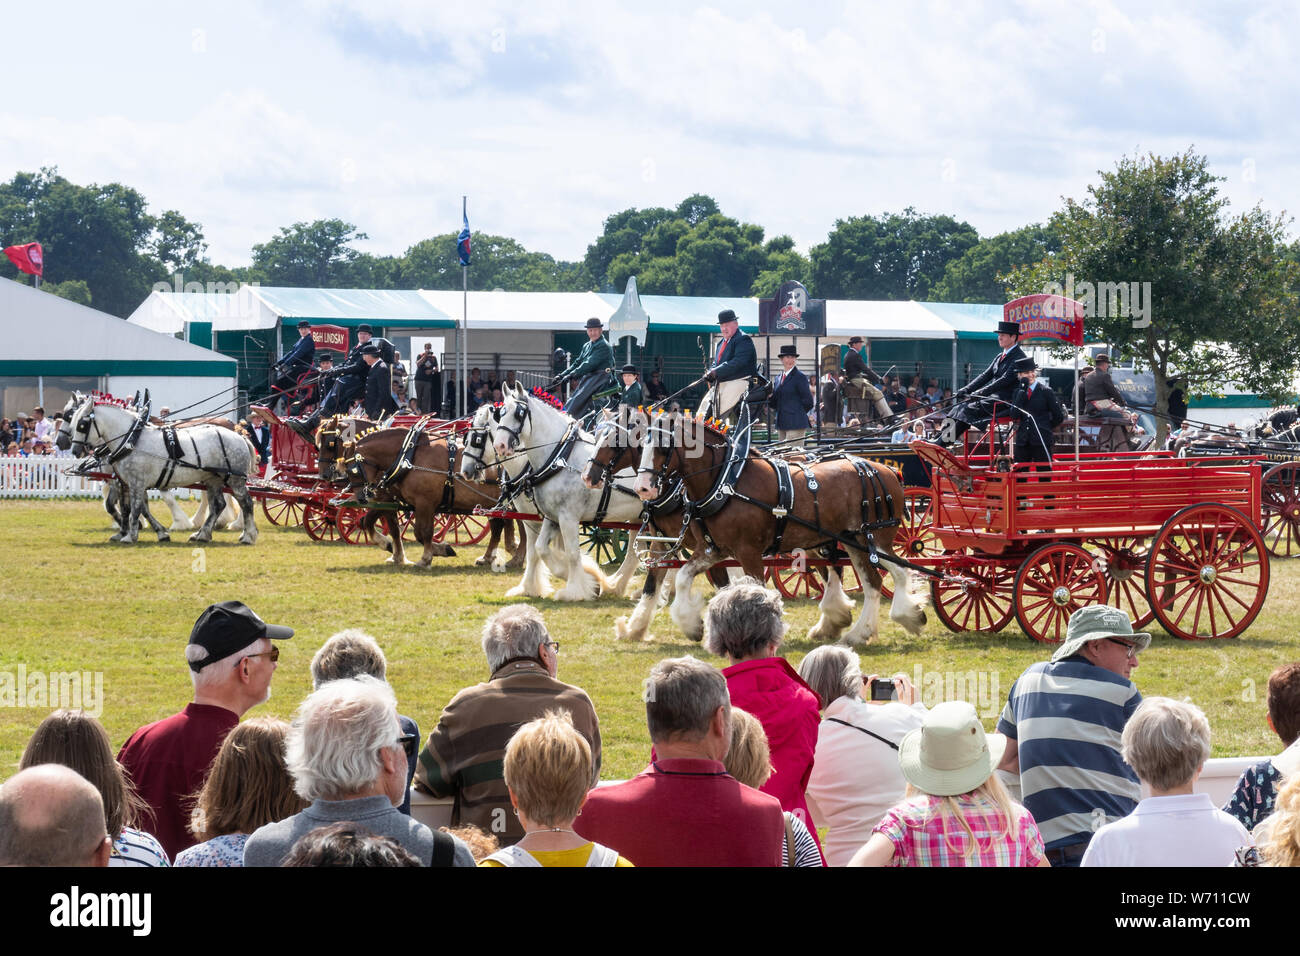 New Forest and Hampshire County Show 2019 - The Heavy Horse Musical Parade taking place in the main arena Stock Photo